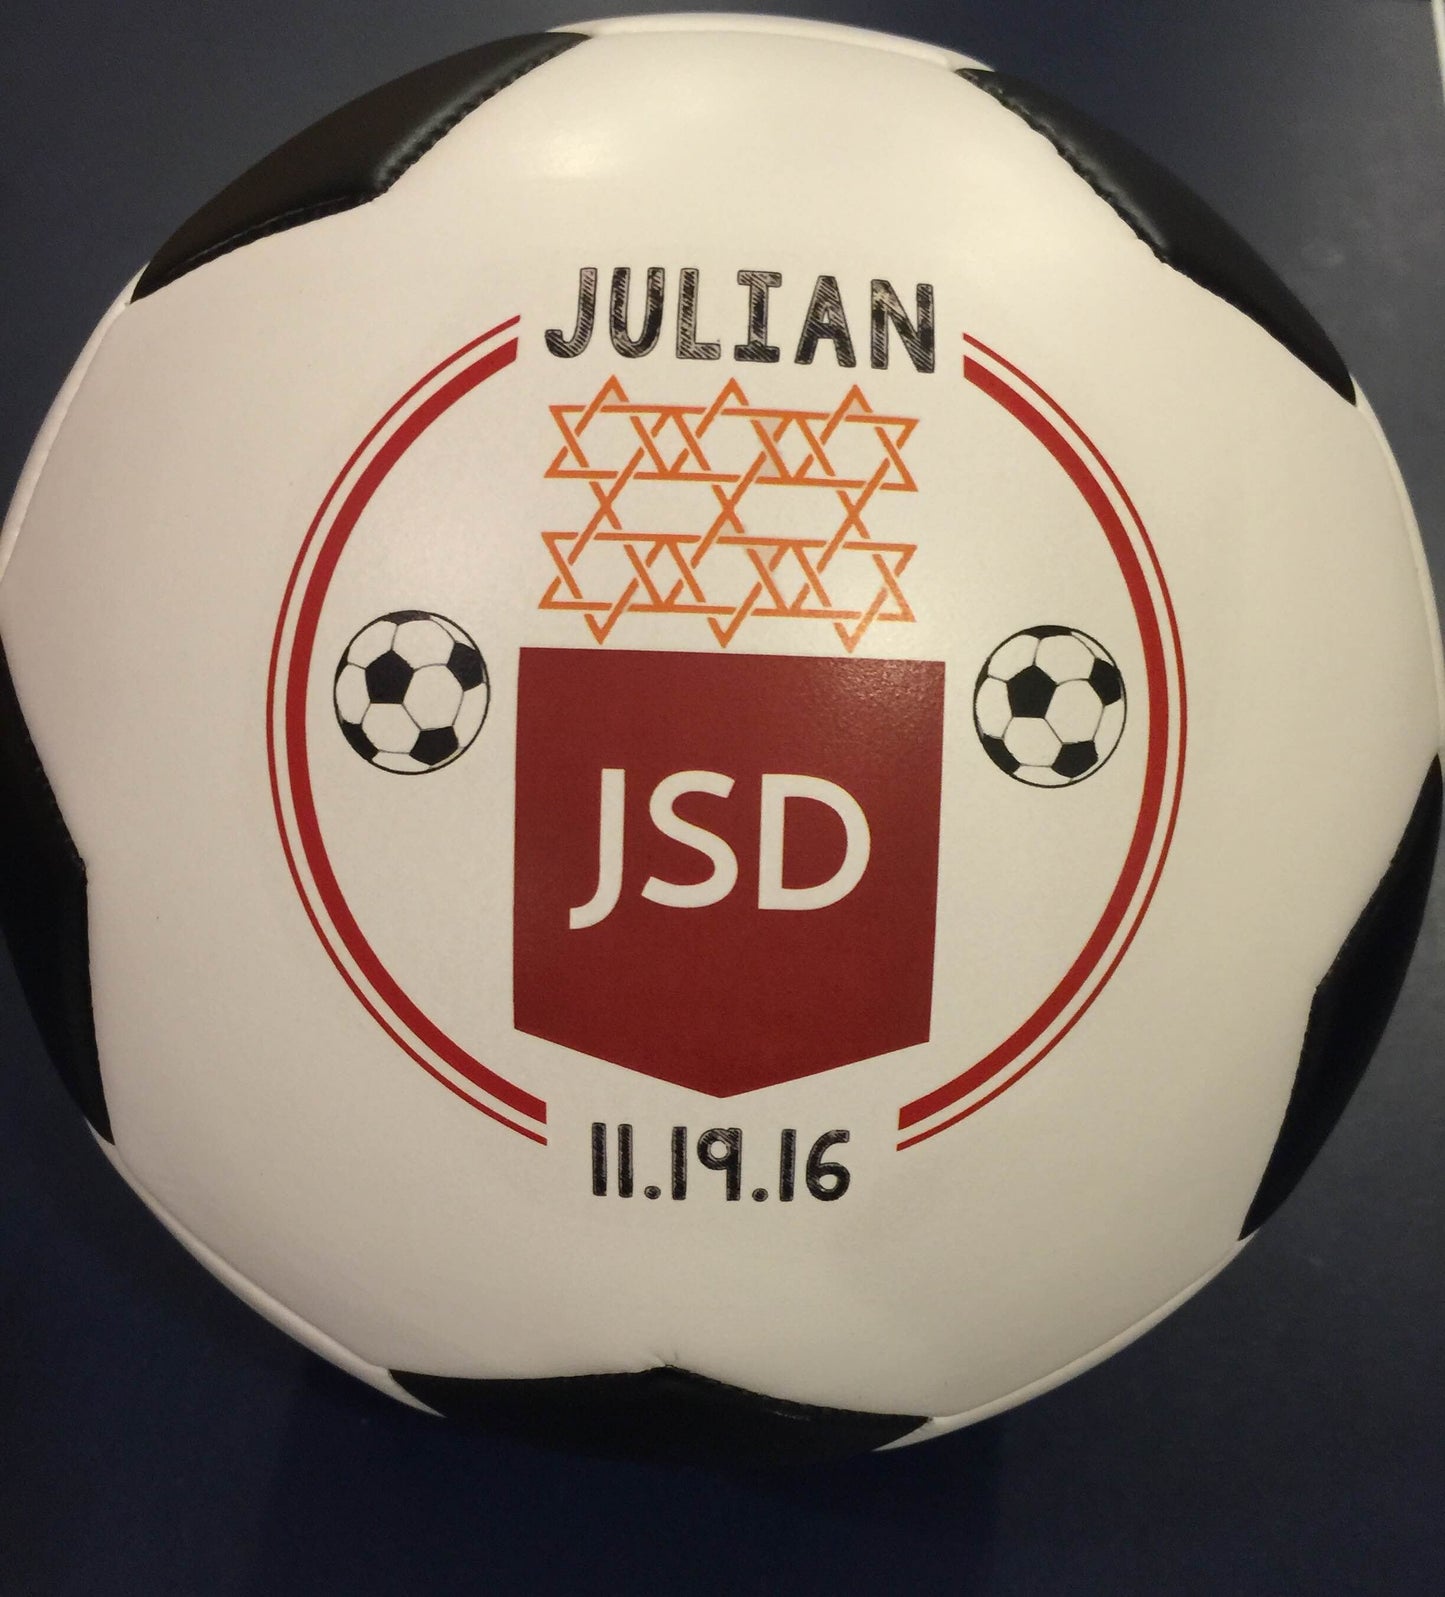 Personalized, Custom Regulation Size Soccer Balls for Coaches' Gifts, Senior Gifts, Team Awards and Soccer Gifts